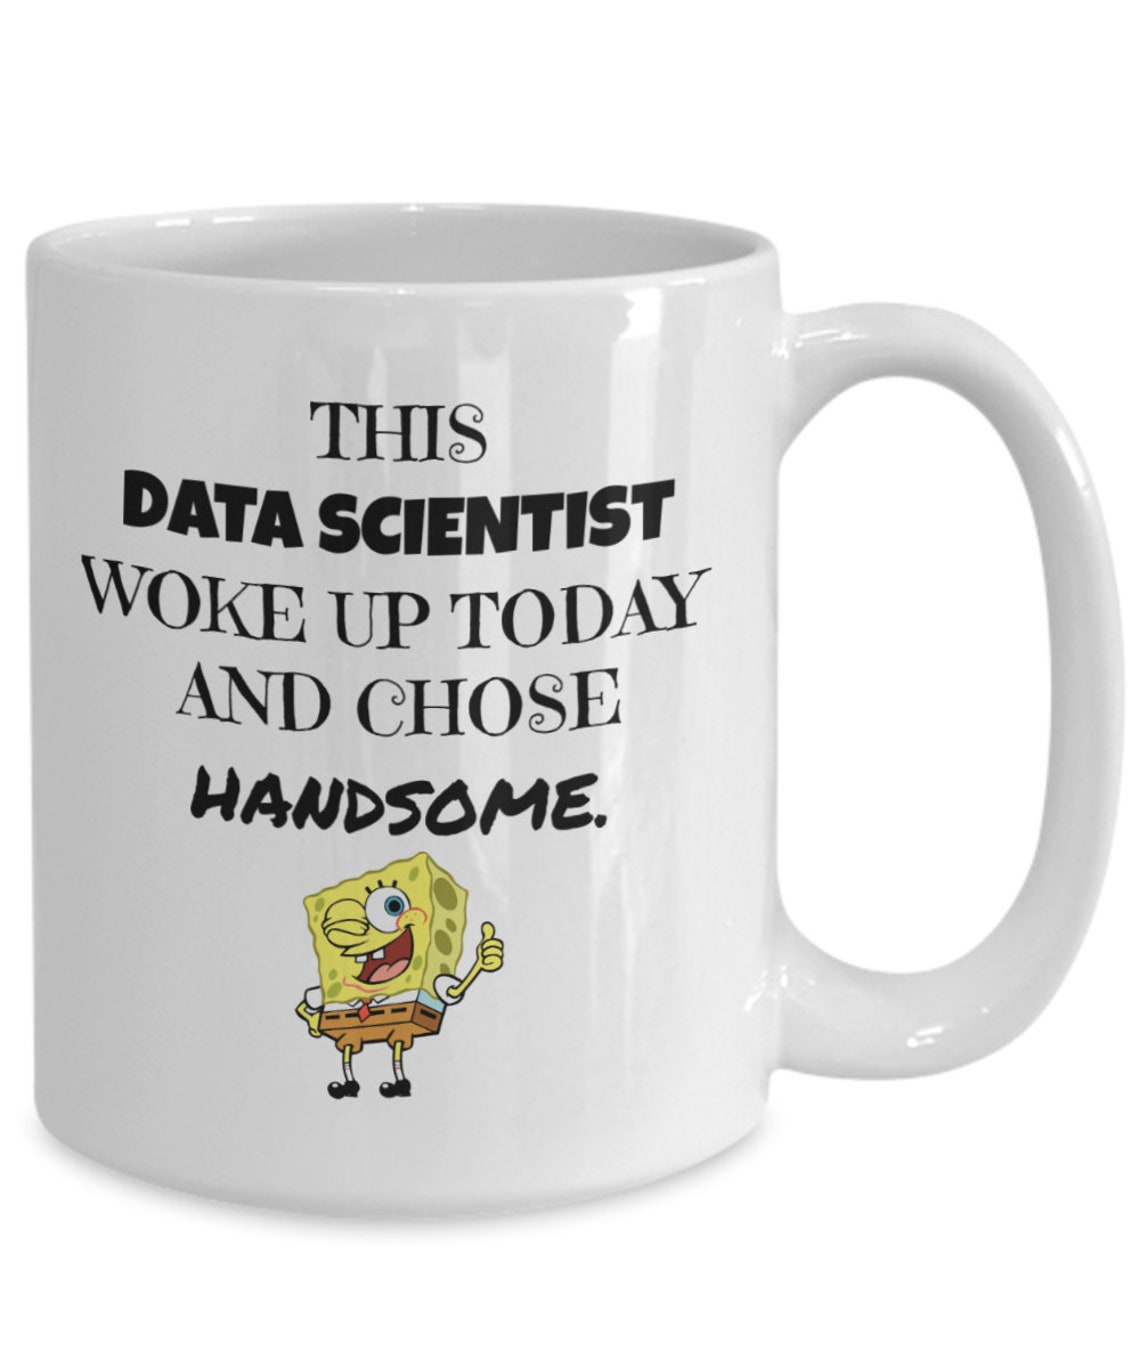 Funny coffee and tea mug gift for data scientist this data